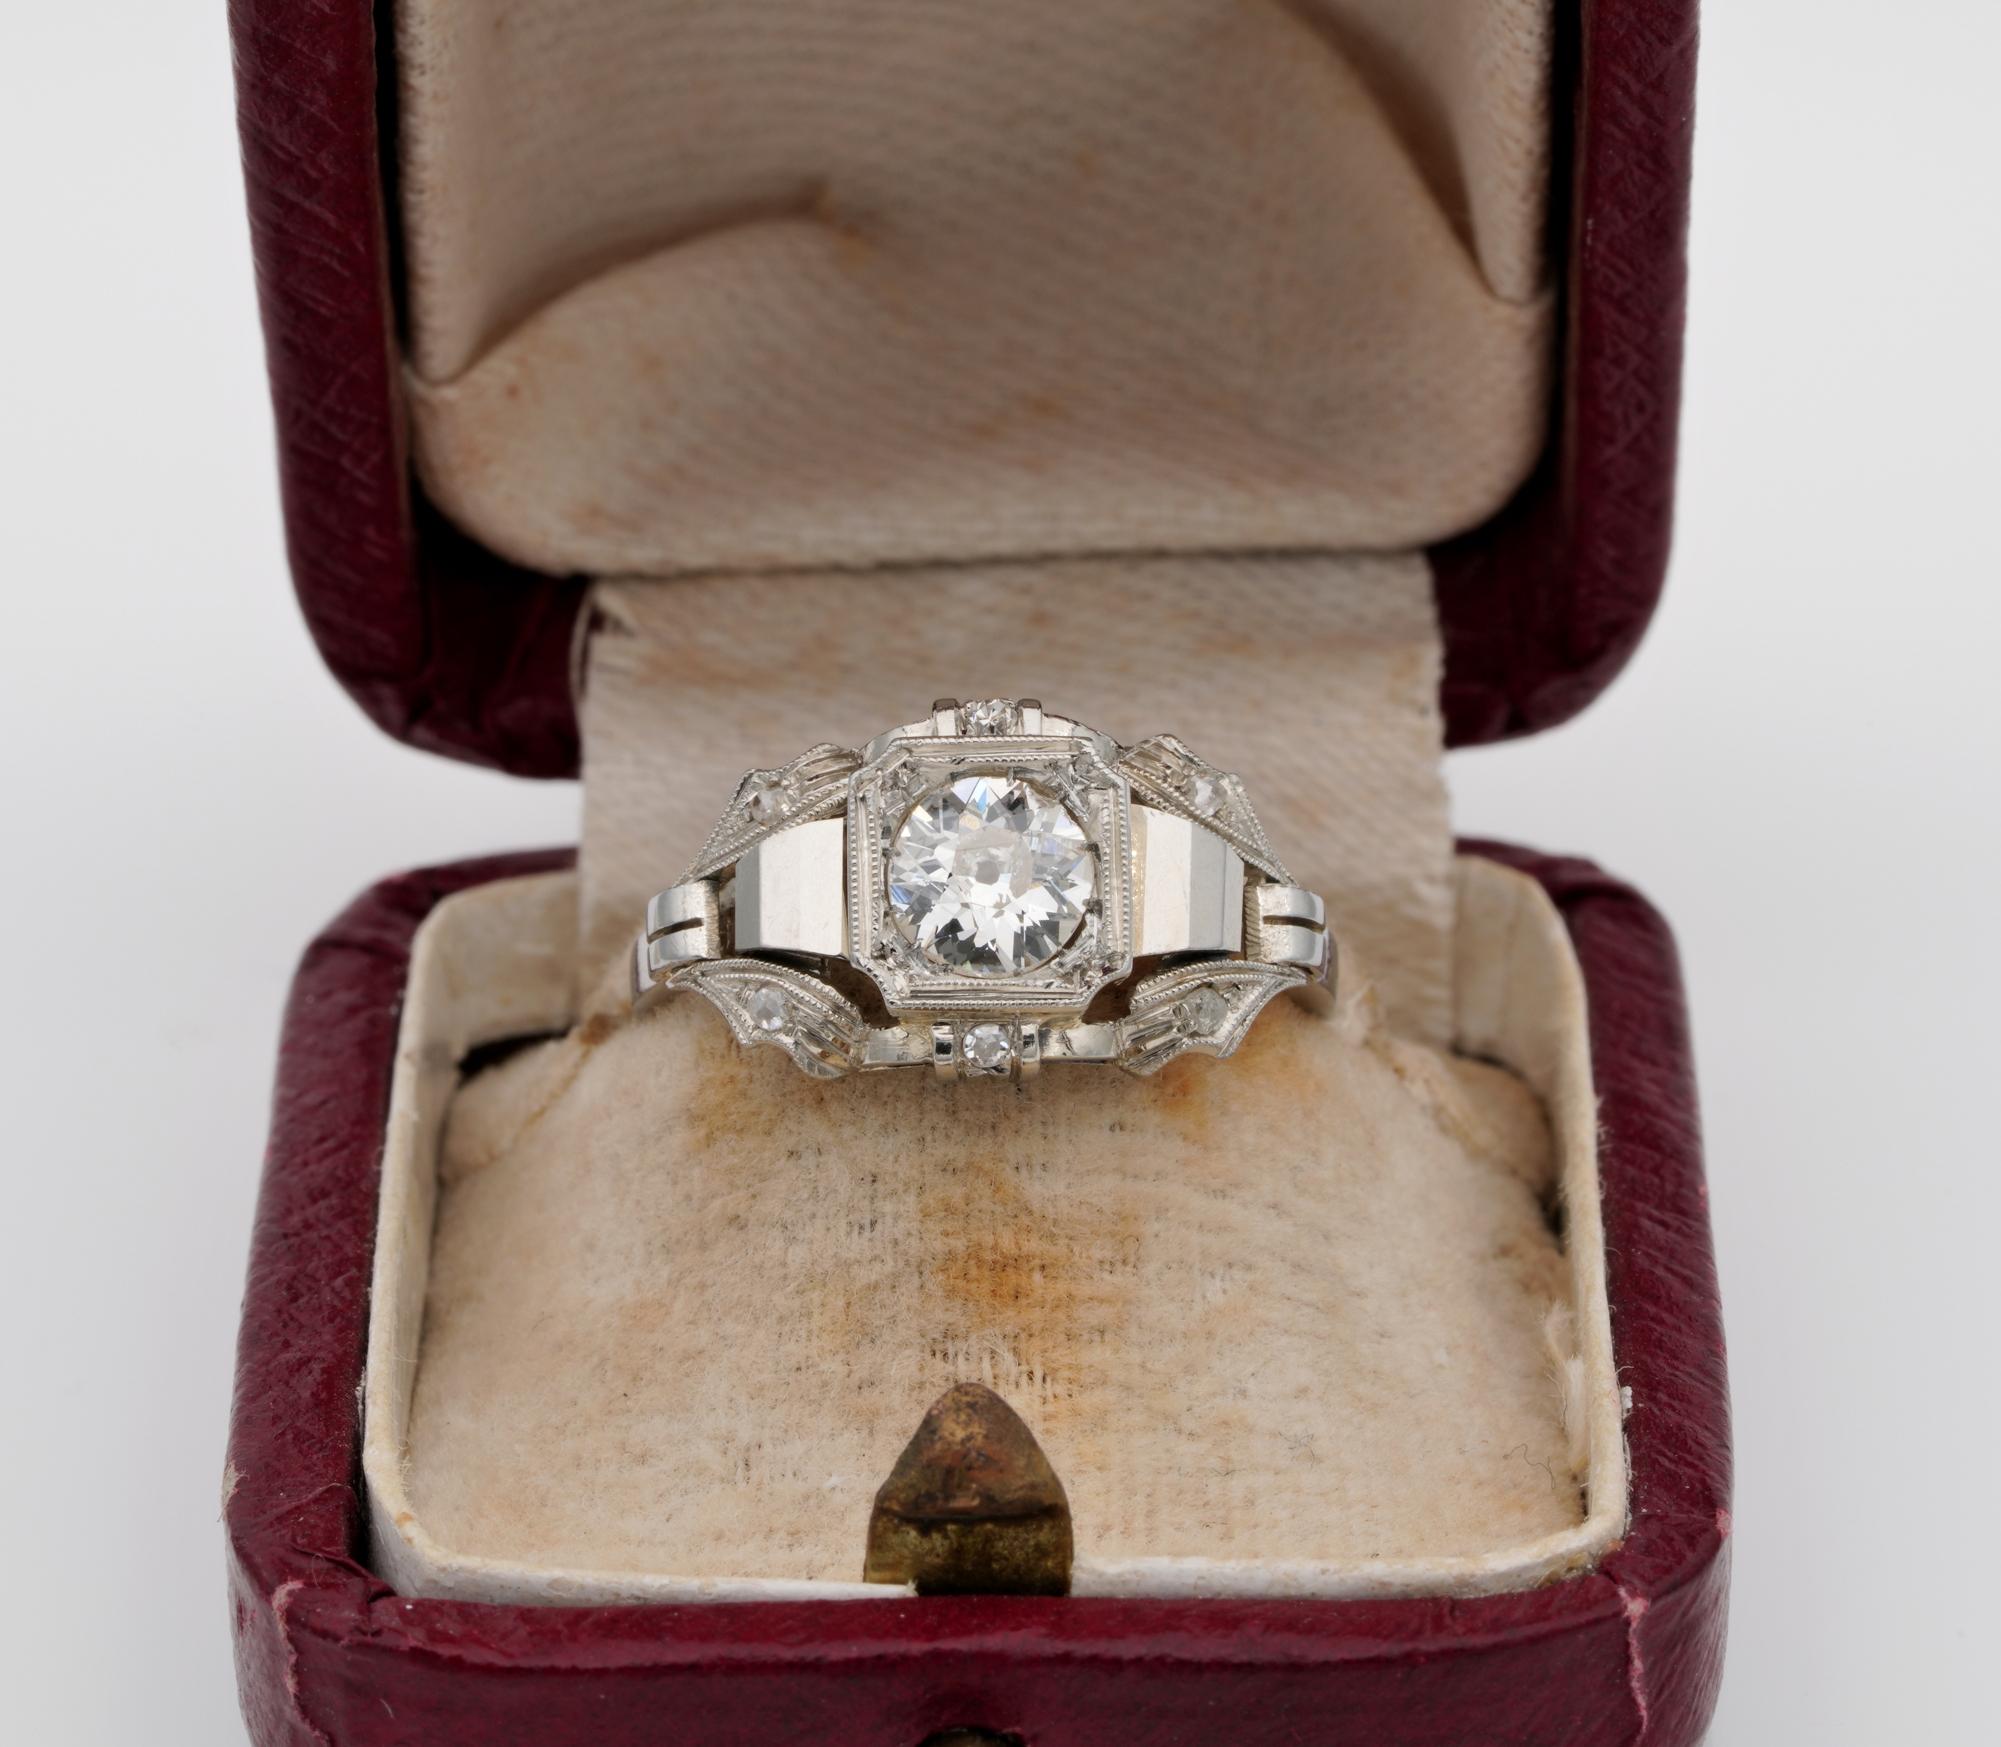 Stepping back into History!

One exquisite and full of the Deco character authentic 1930 ca Diamond solitaire ring
Italian origin bearing the fascist hallmarks of the period
Strong character in design expressing the fashion of the era understated as